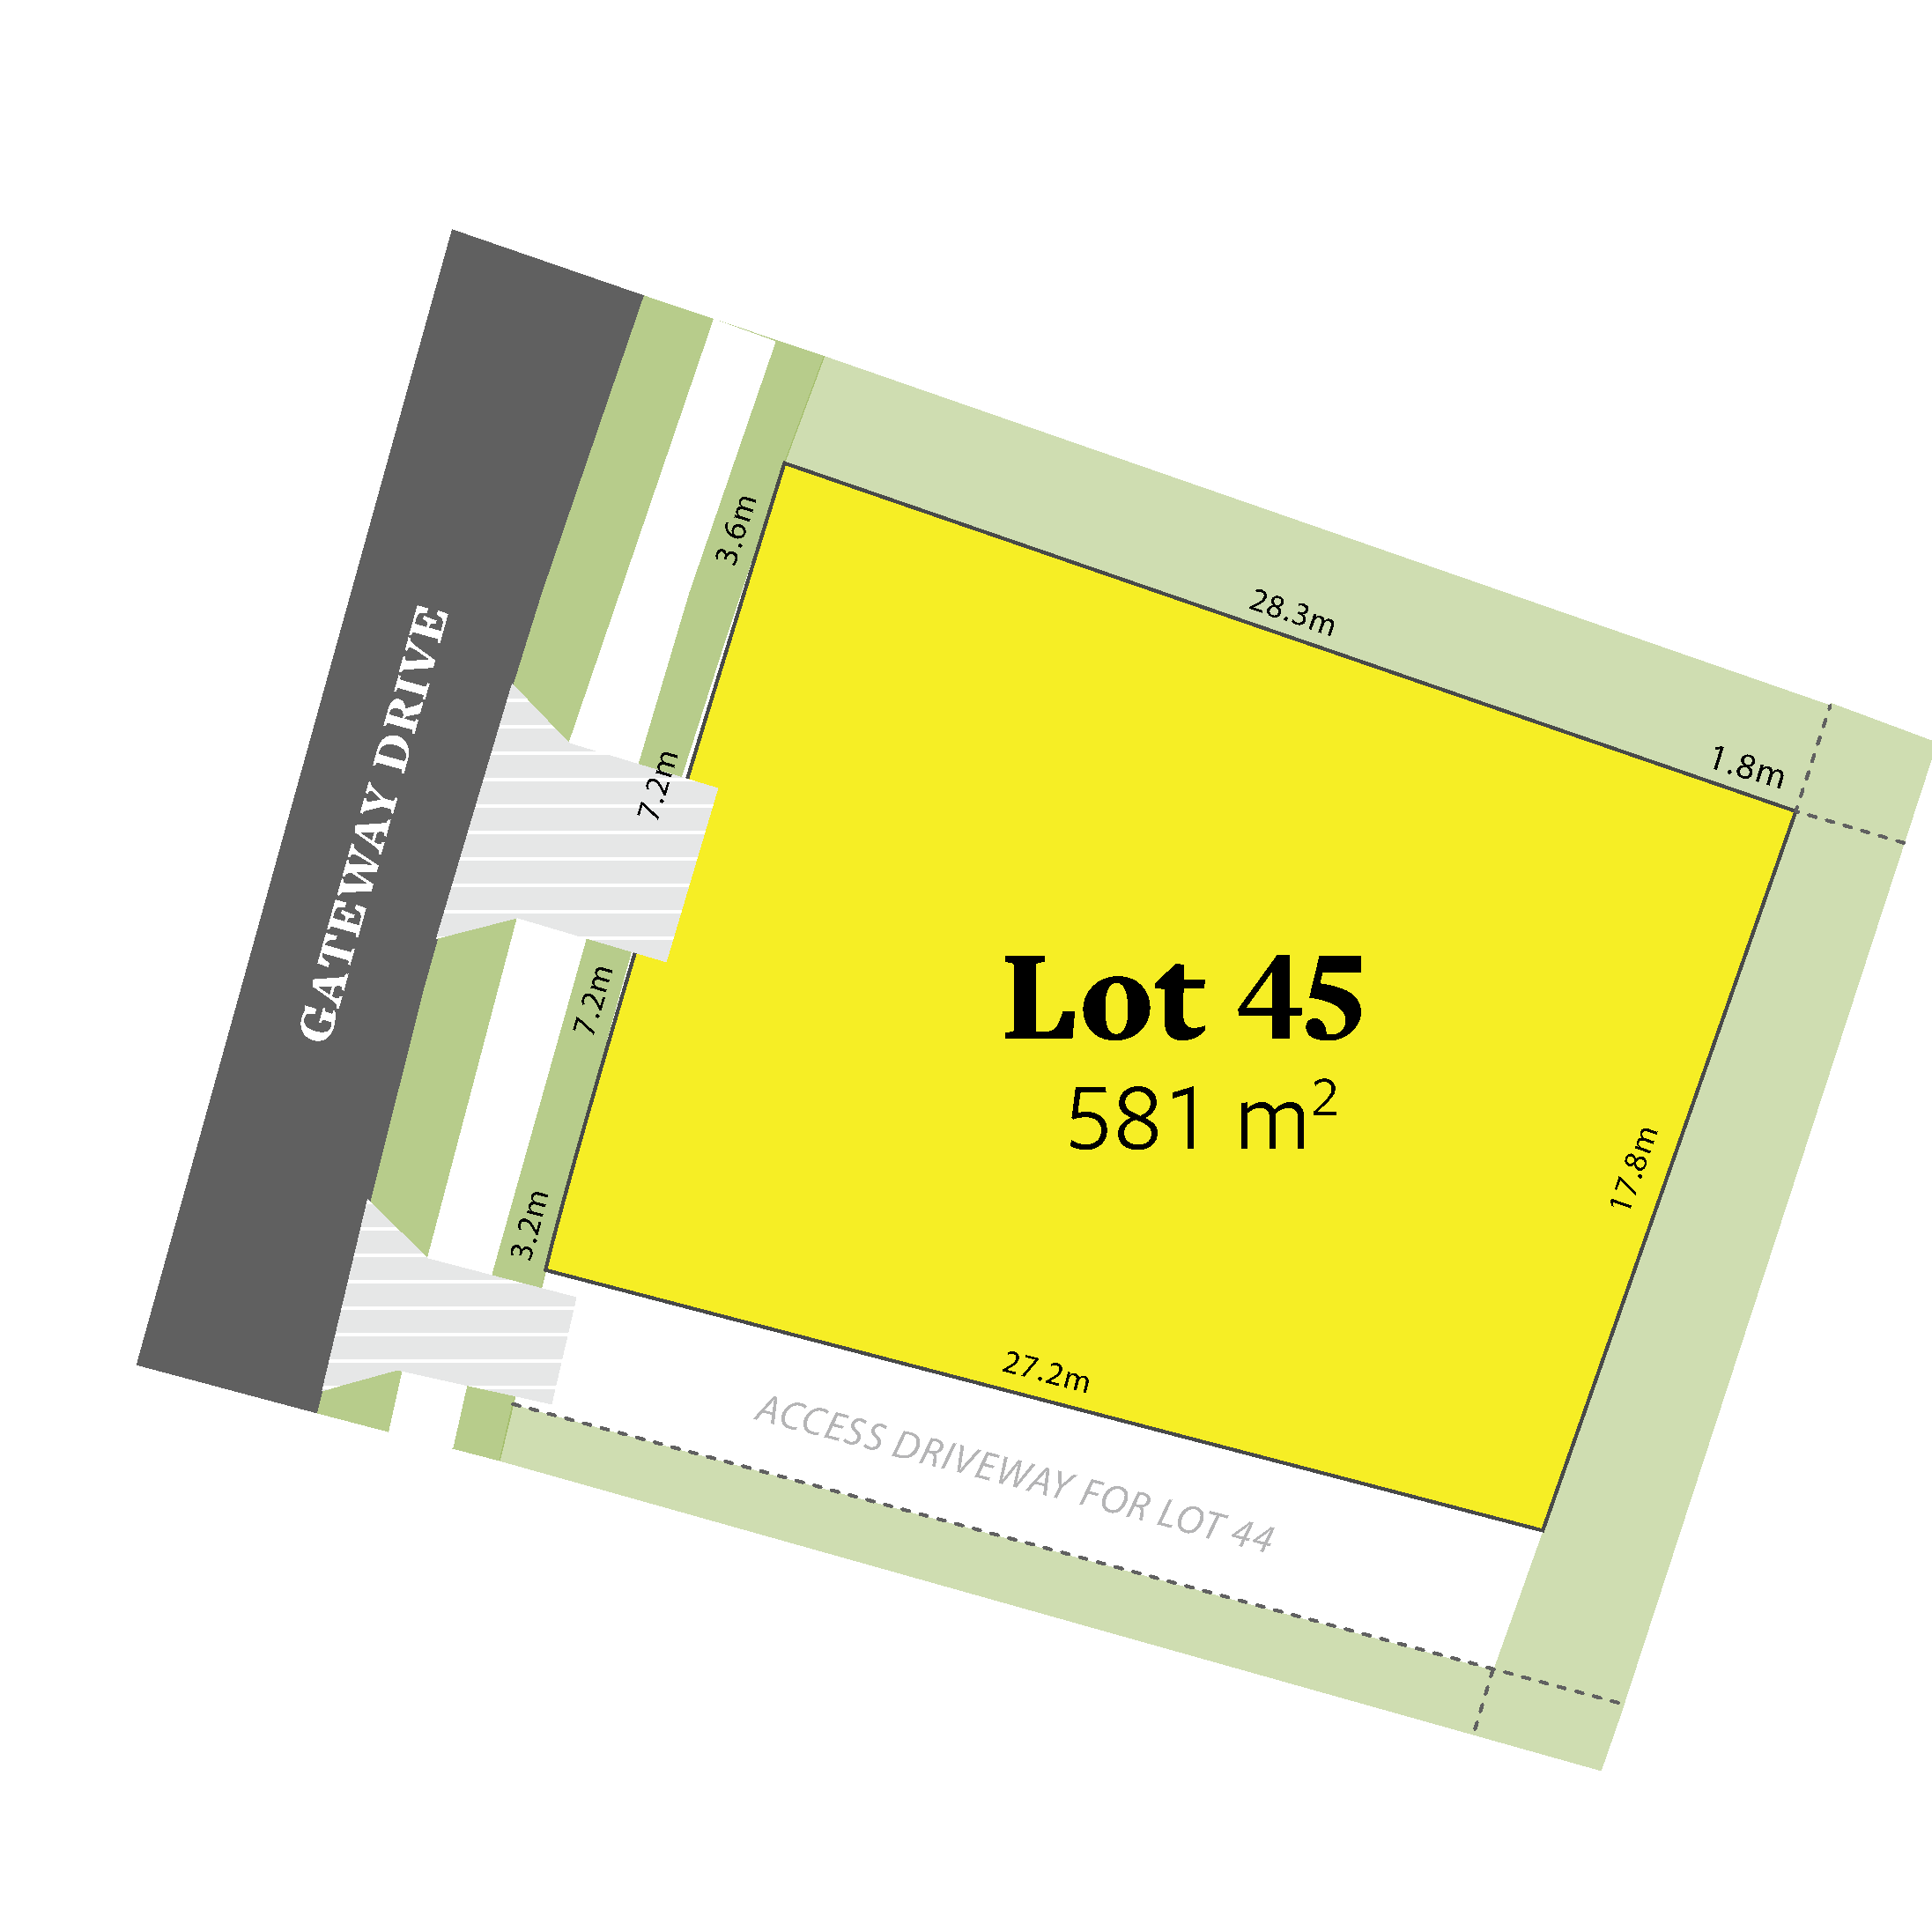 Image of Lot 45